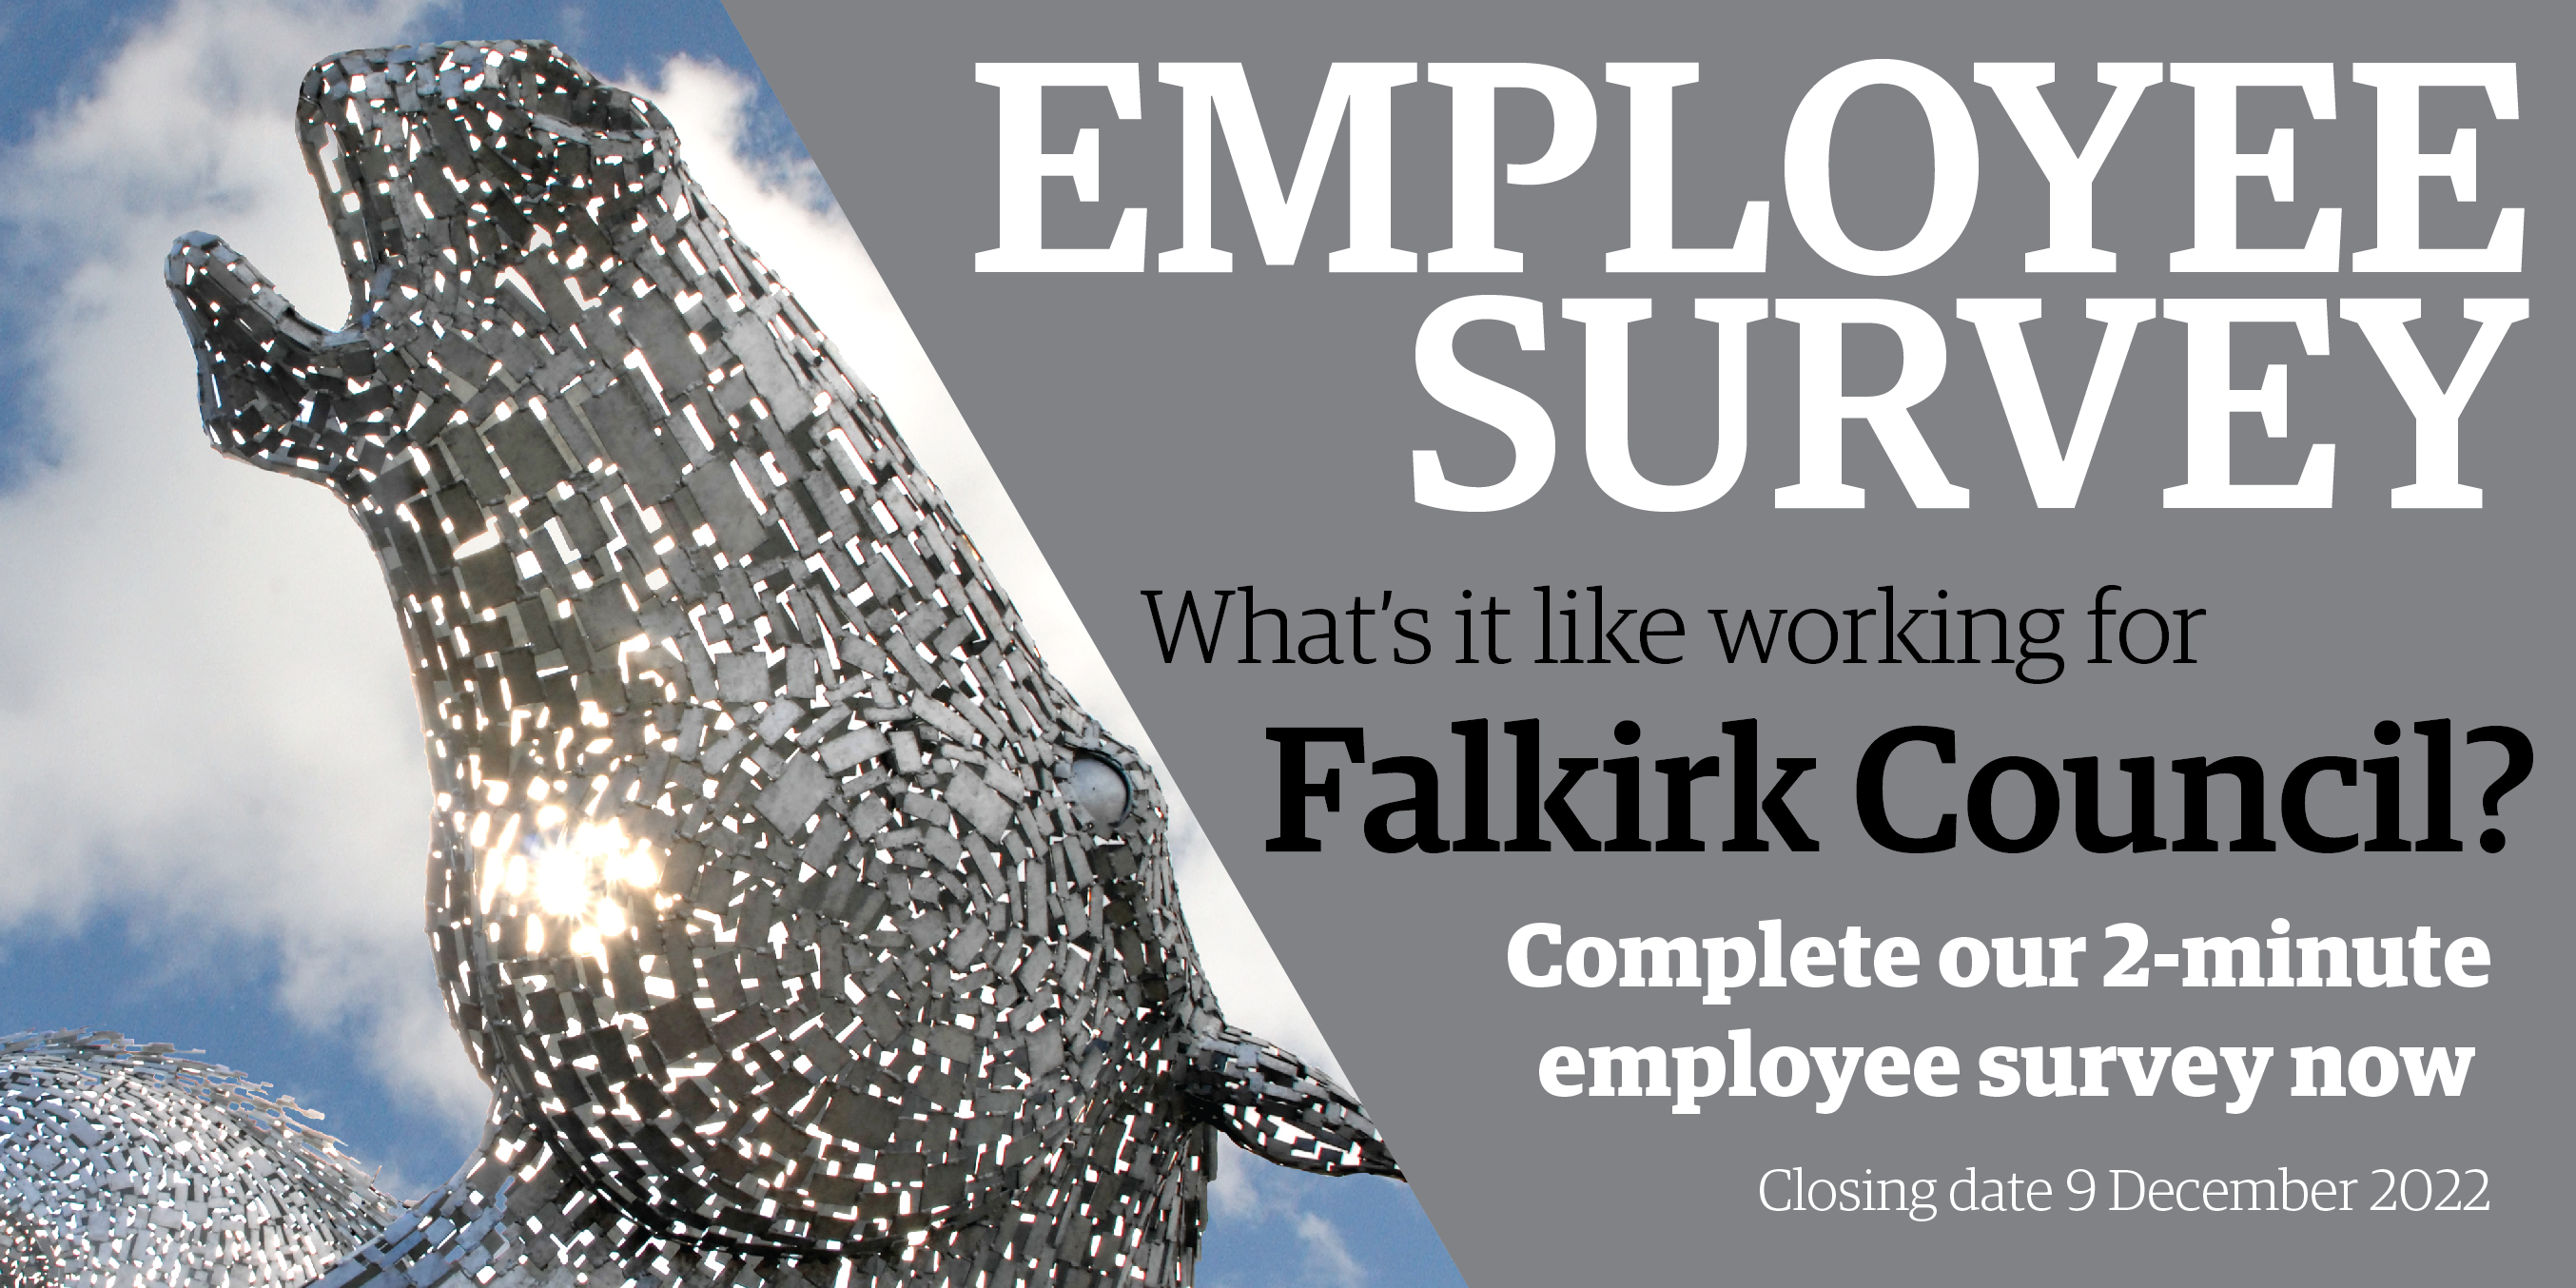 We need you to fill in this short survey to help us better understand how you feel about working for Falkirk Council.